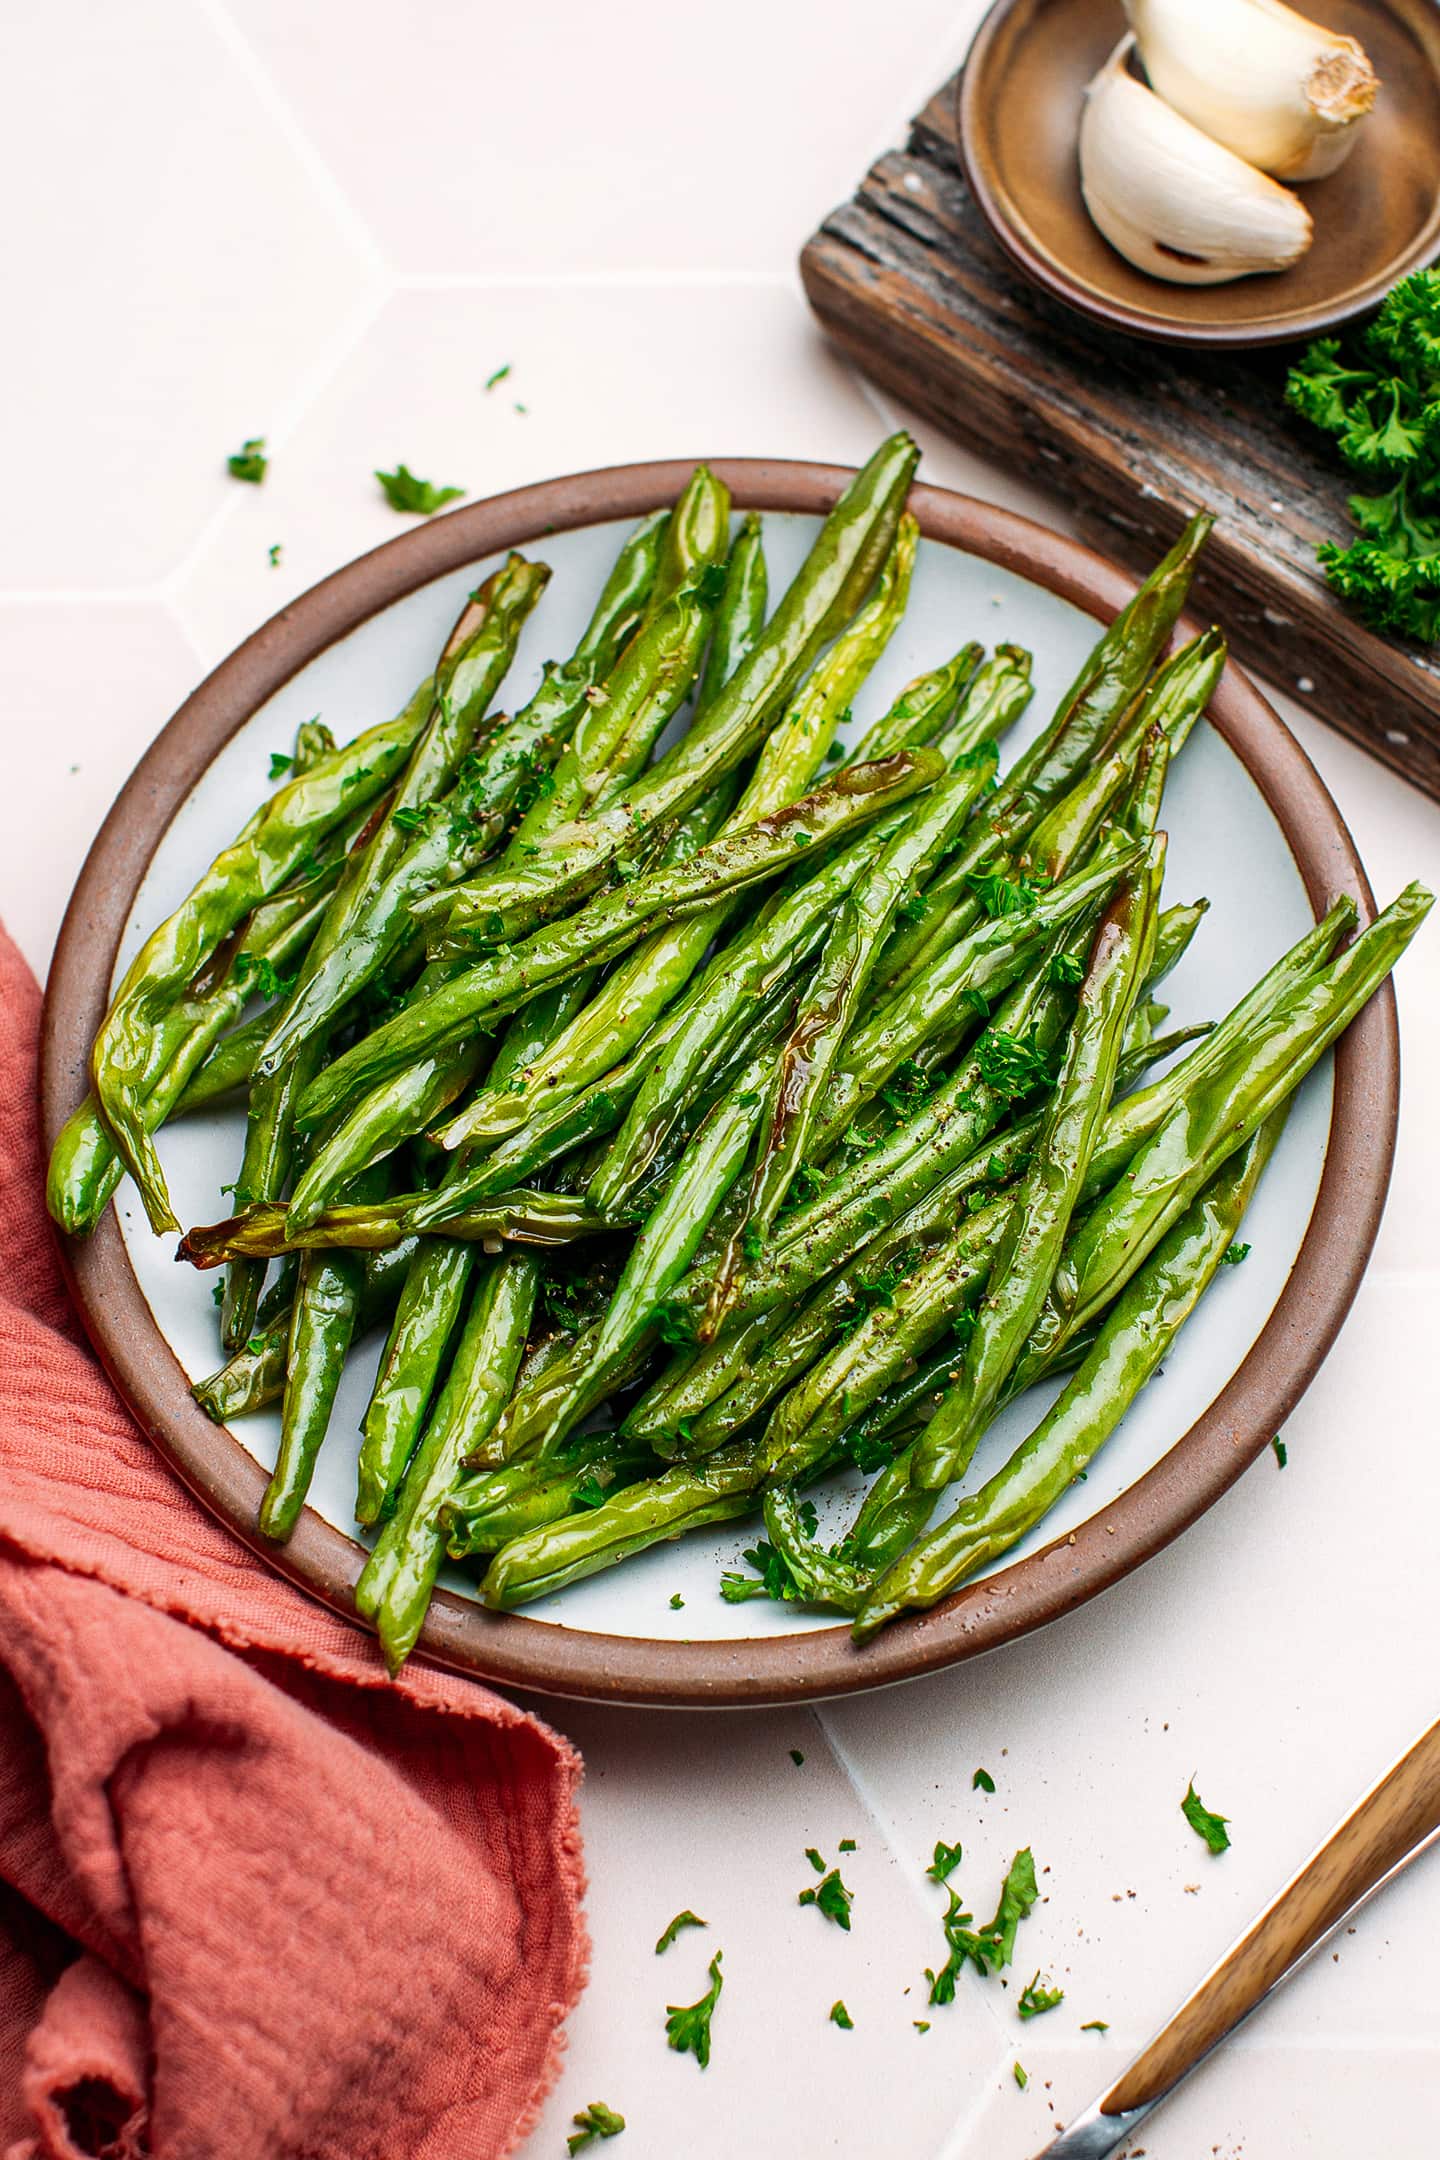 Green beans with parsley and pepper on a plate.